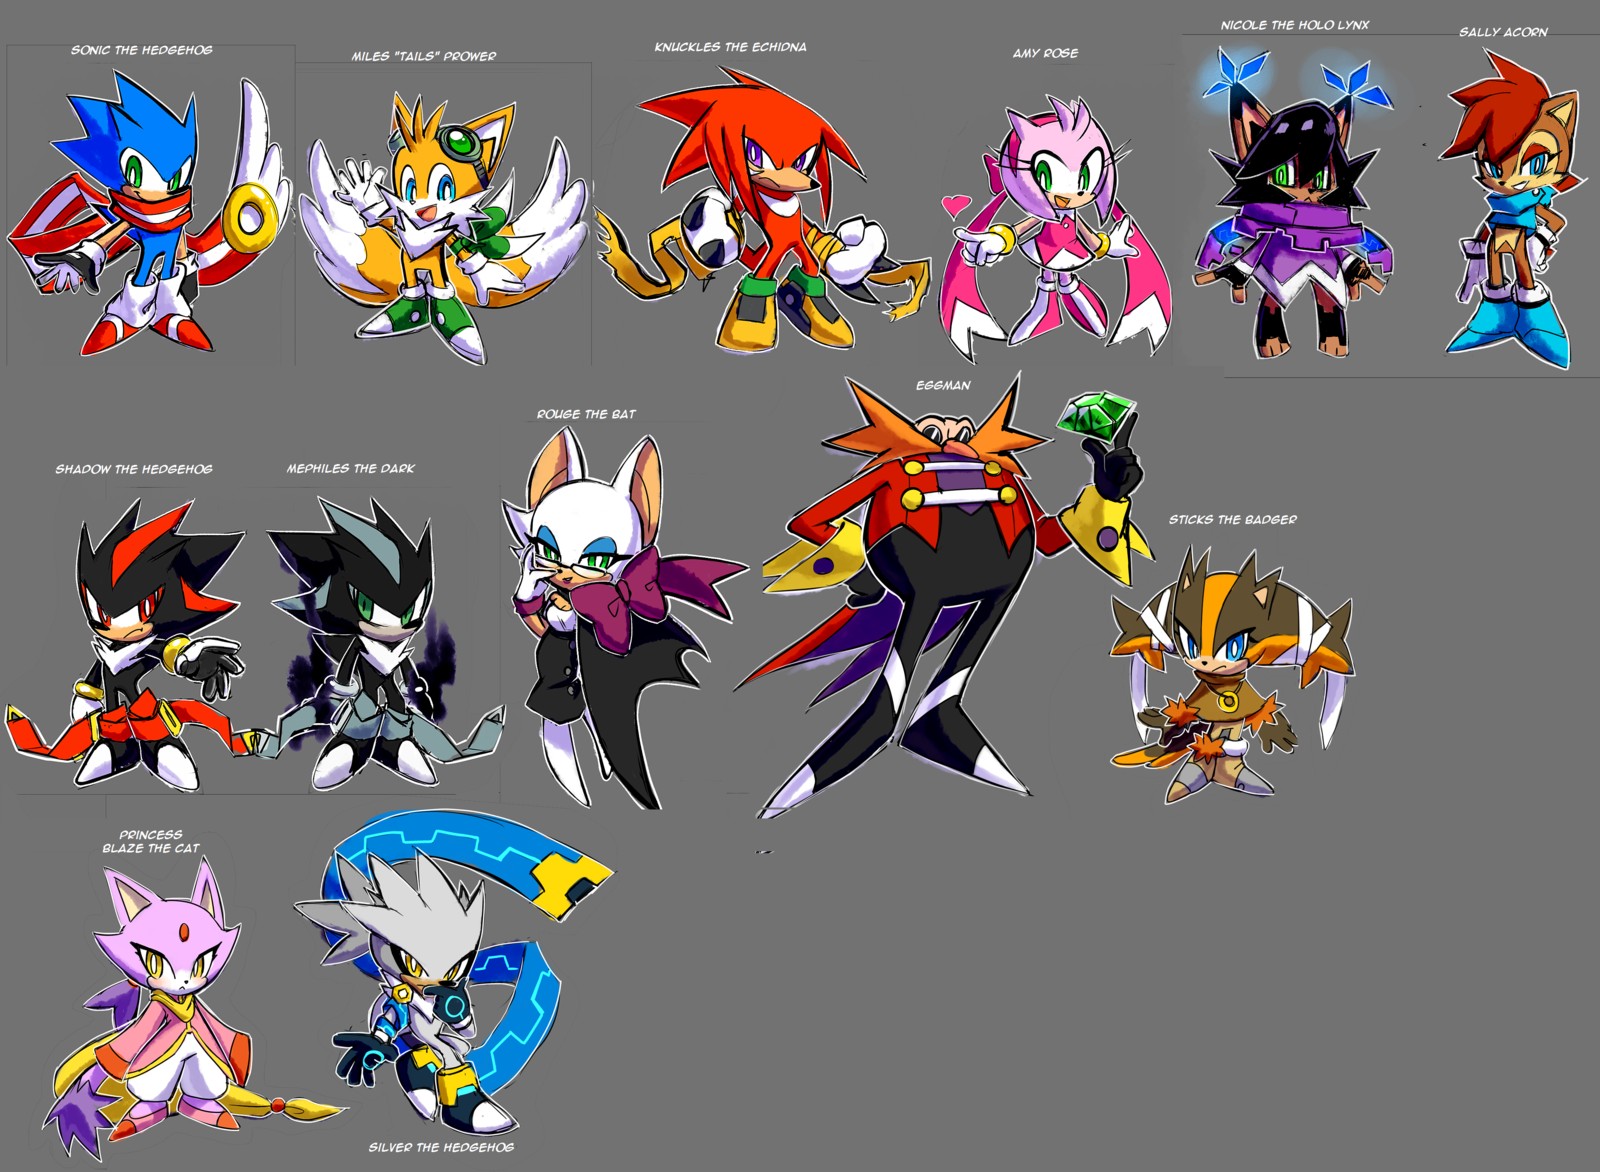 Tails (character), Sonic, Sonic the Hedgehog, Sonic Boom, Shadow the Hedgehog, Knuckles Wallpaper